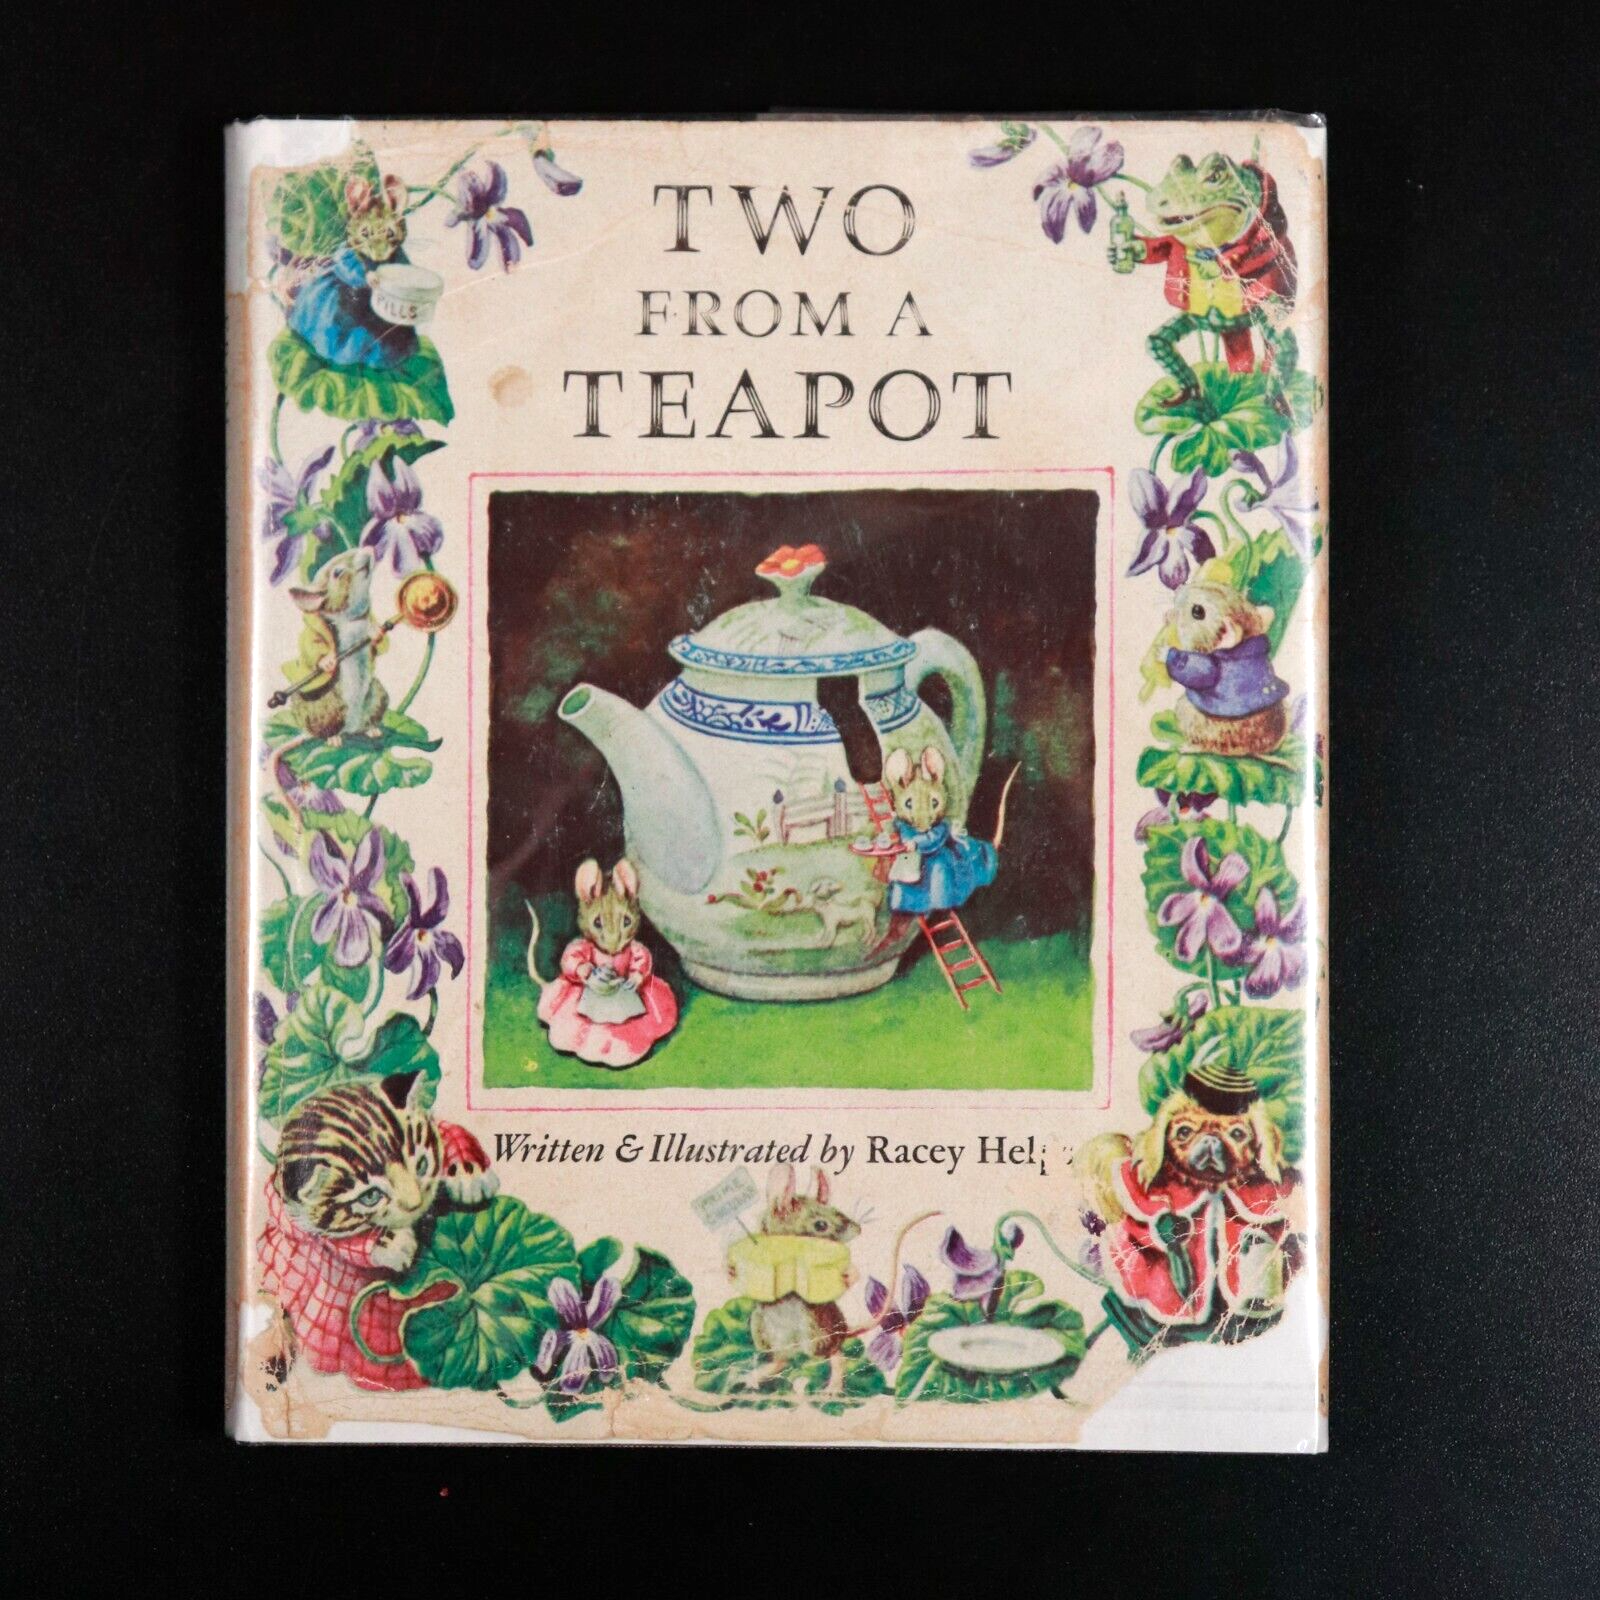 1967 Two From A Teapot by Racey Helps Vintage Illustrated Childrens Book